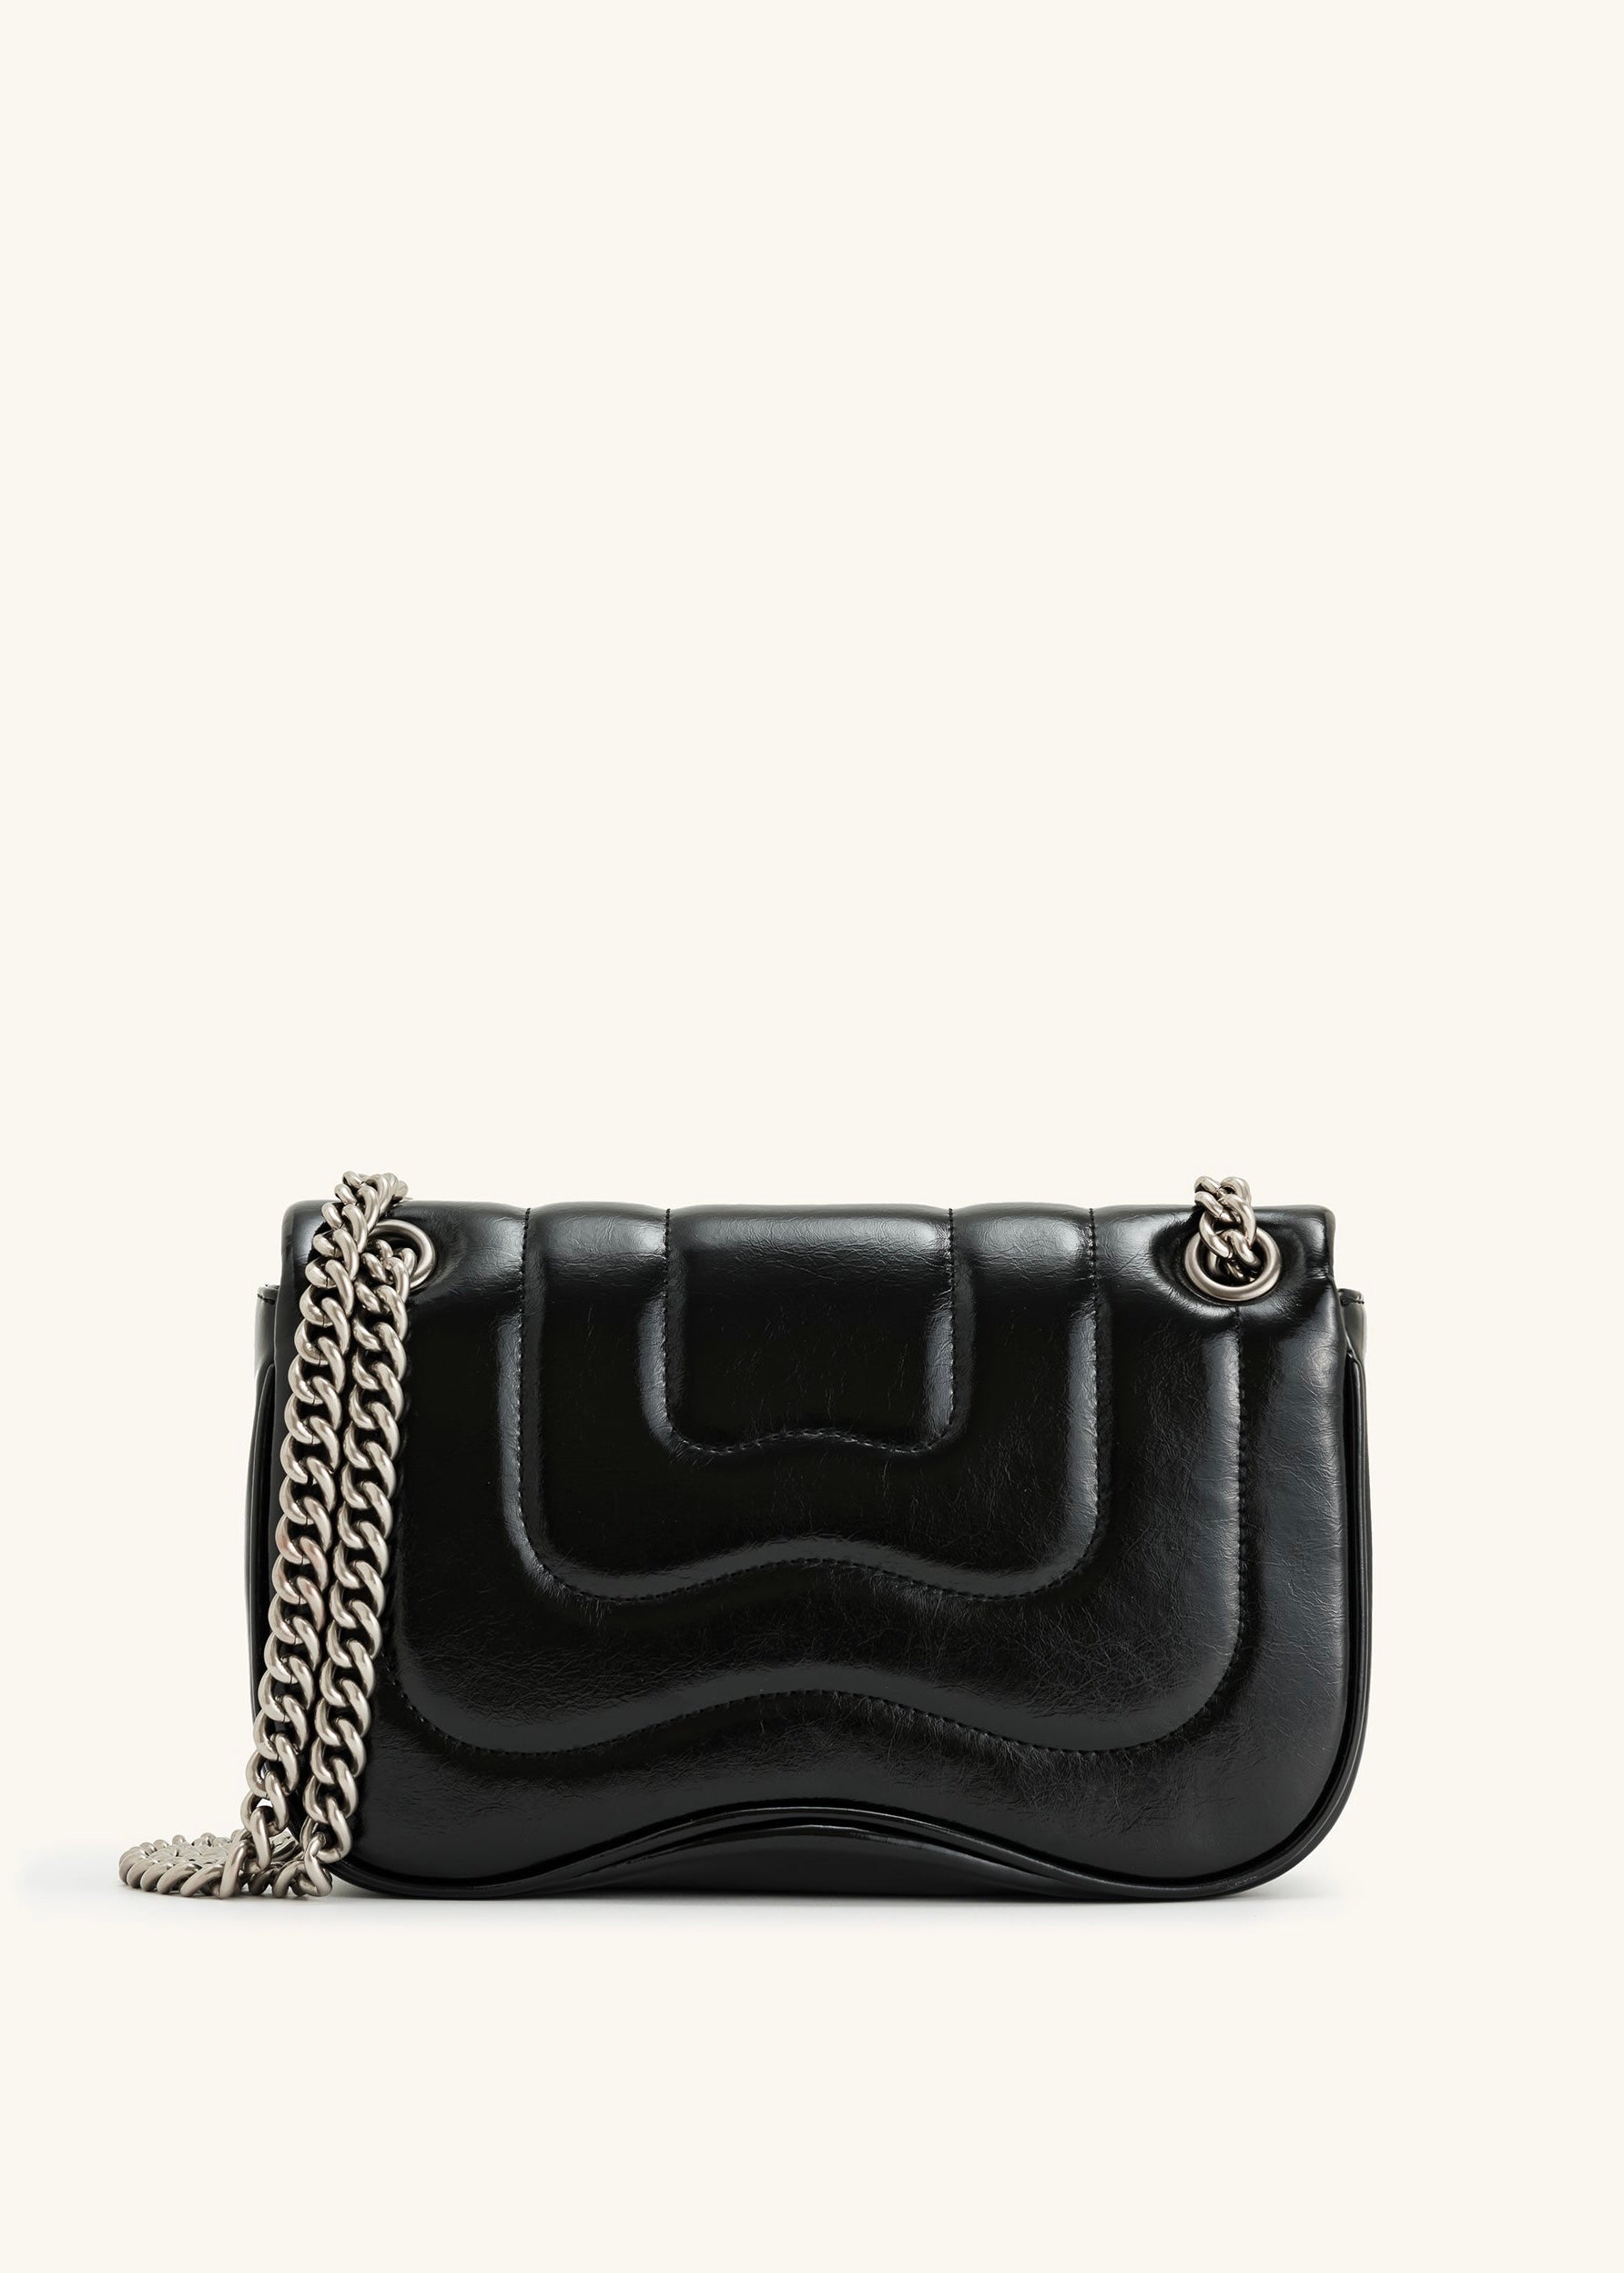 River Island quilted cross body bag with gold chain detail in black | ASOS